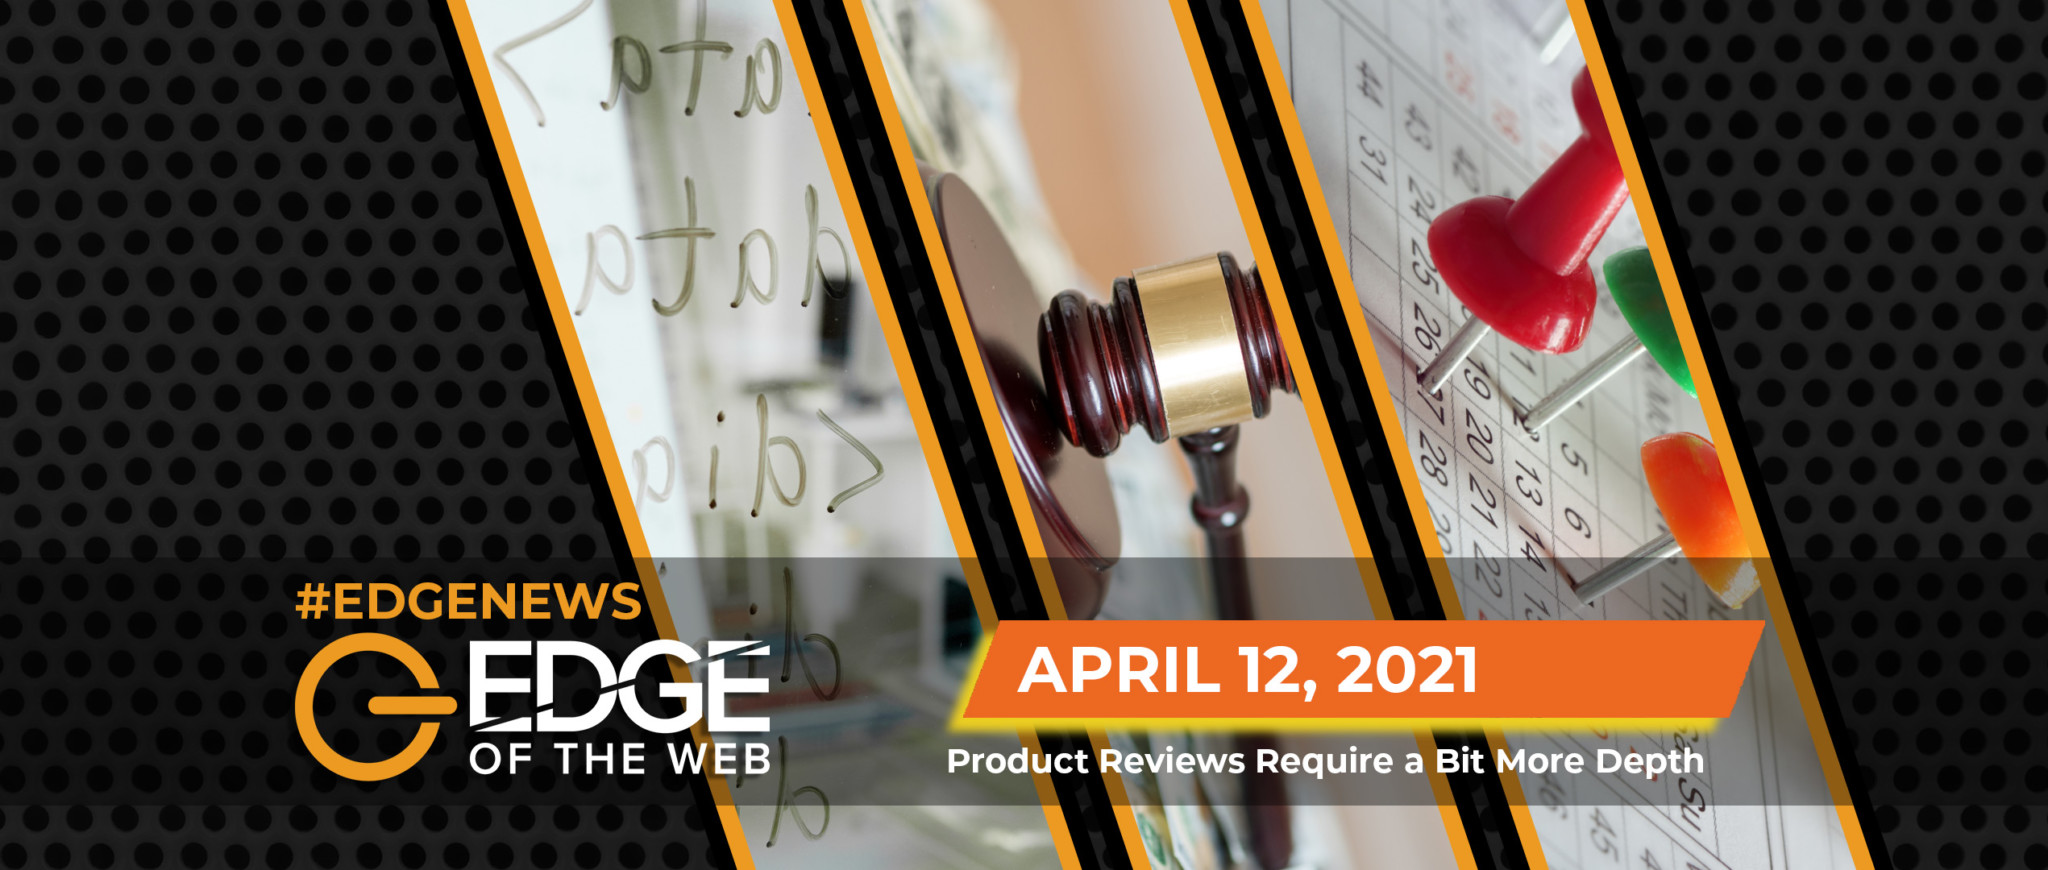 EDGE News Featured Image April 12th